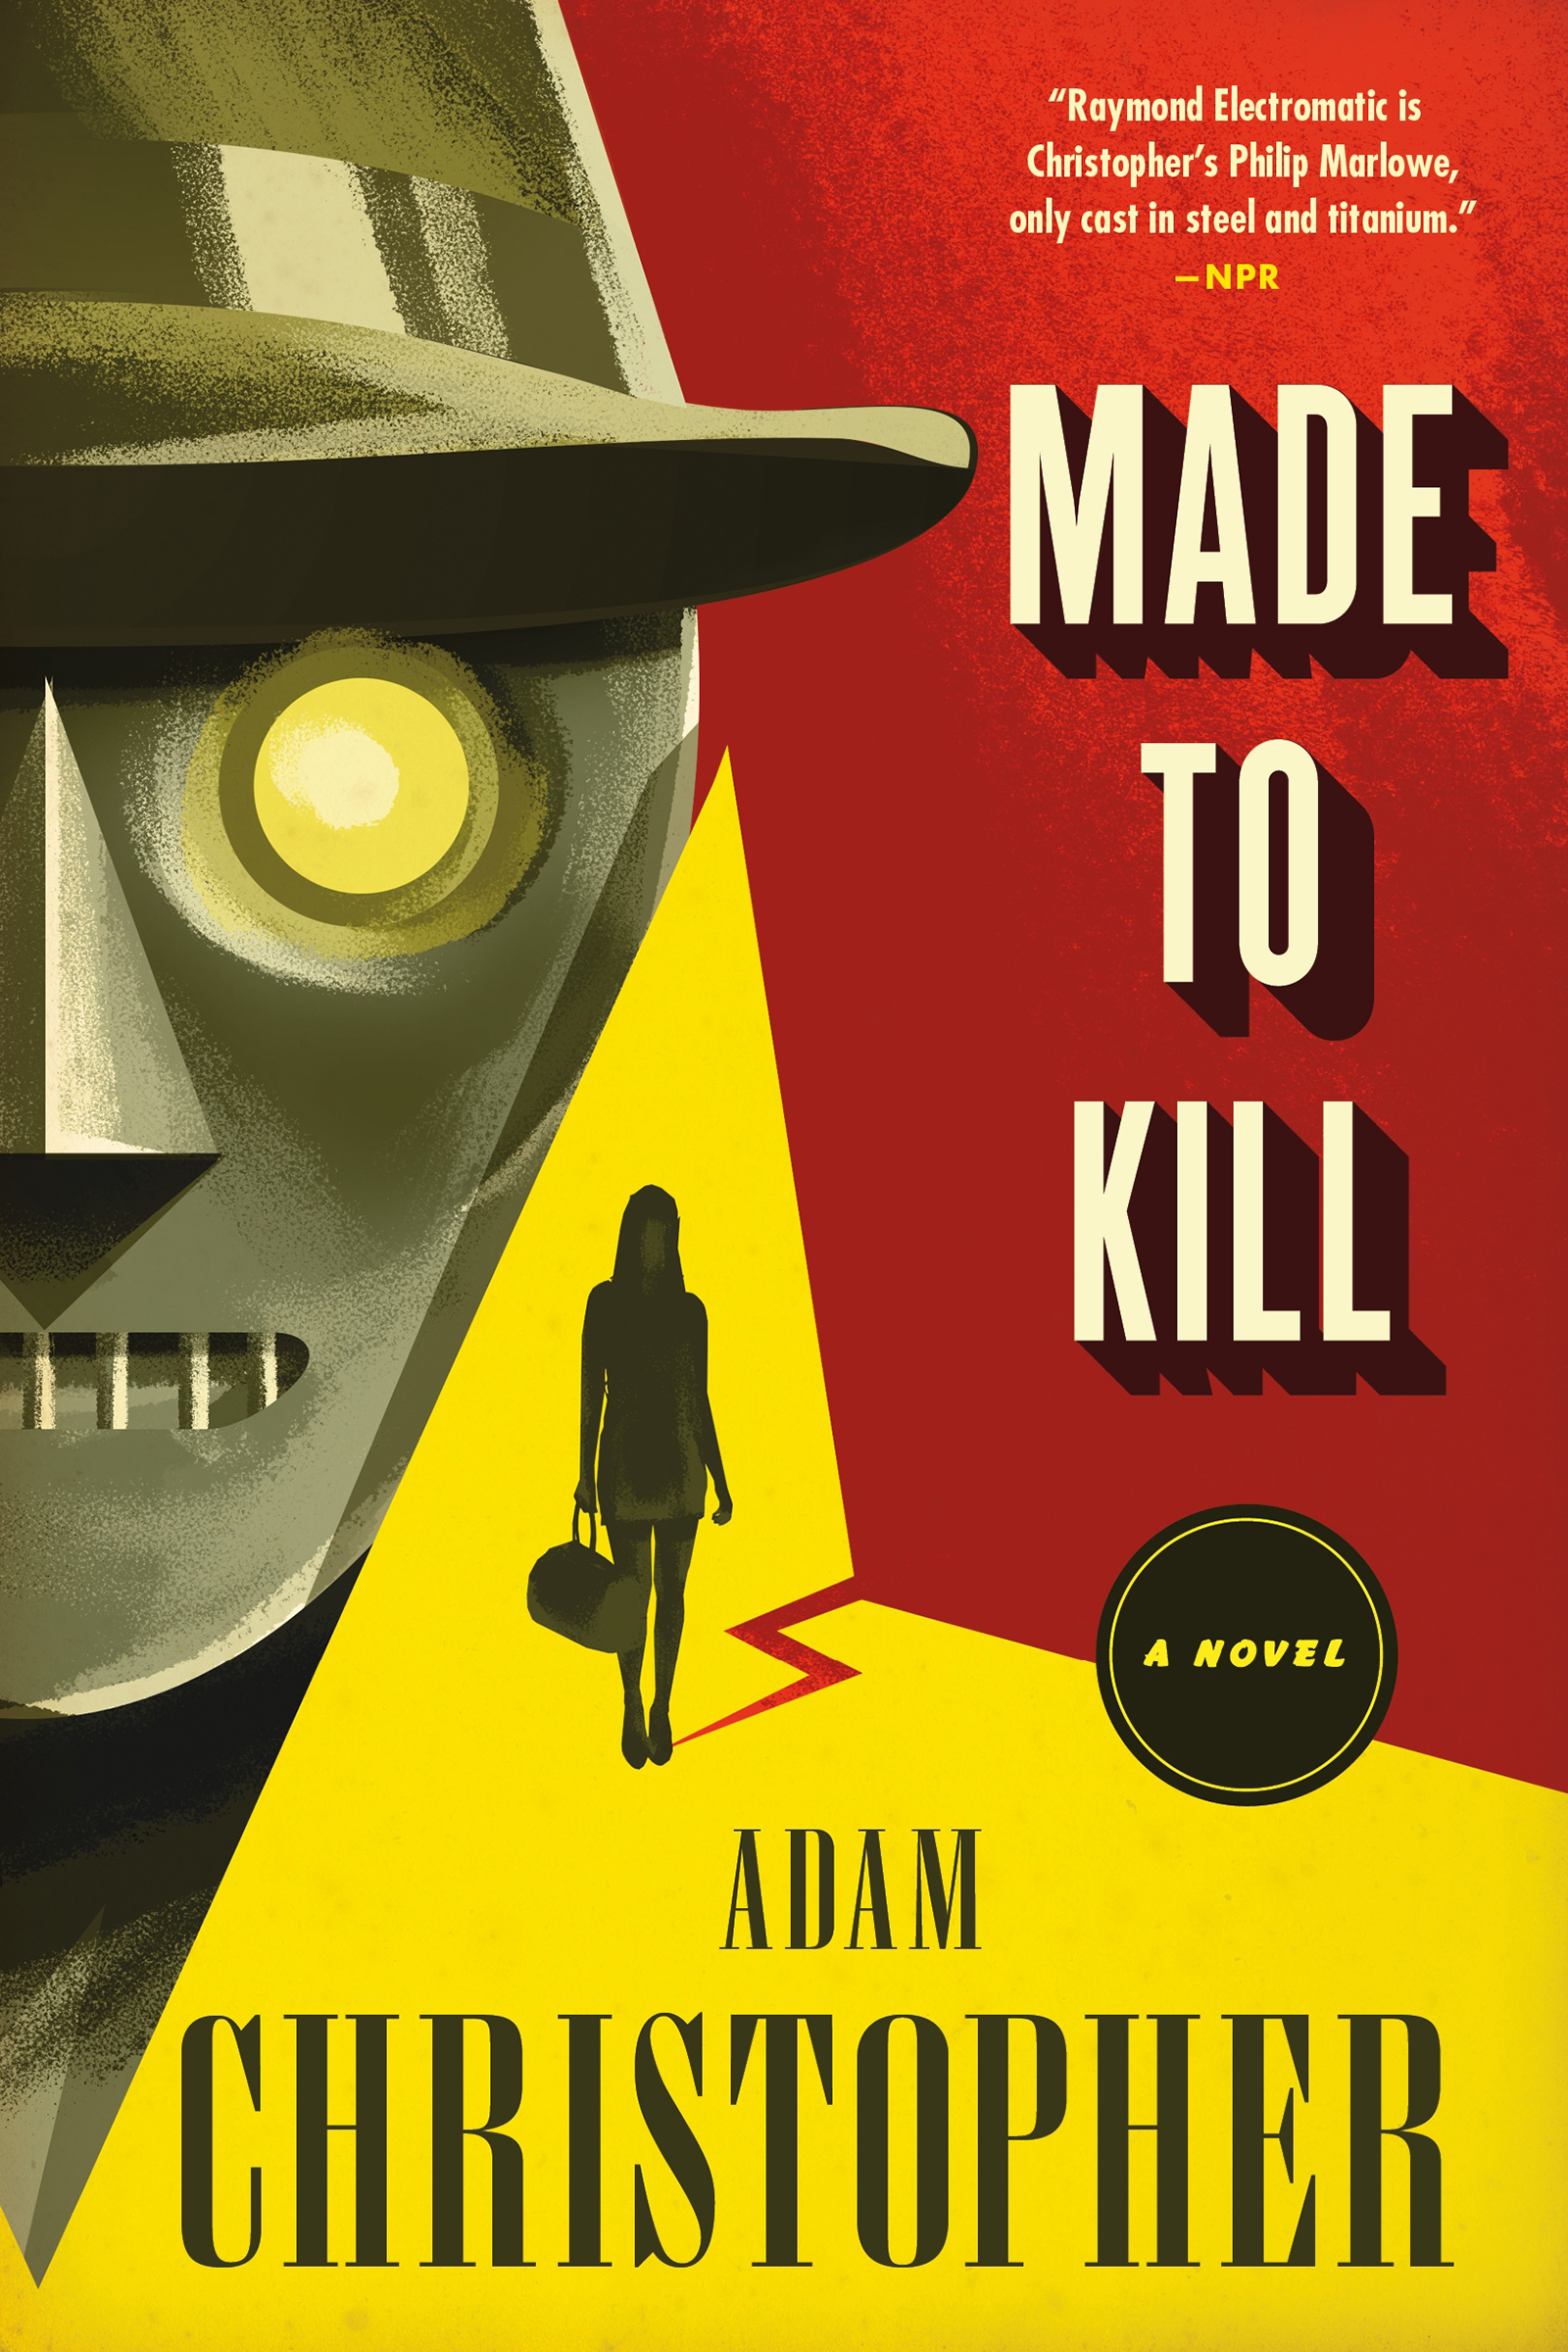 Made to Kill : A Ray Electromatic Mystery by Adam Christopher